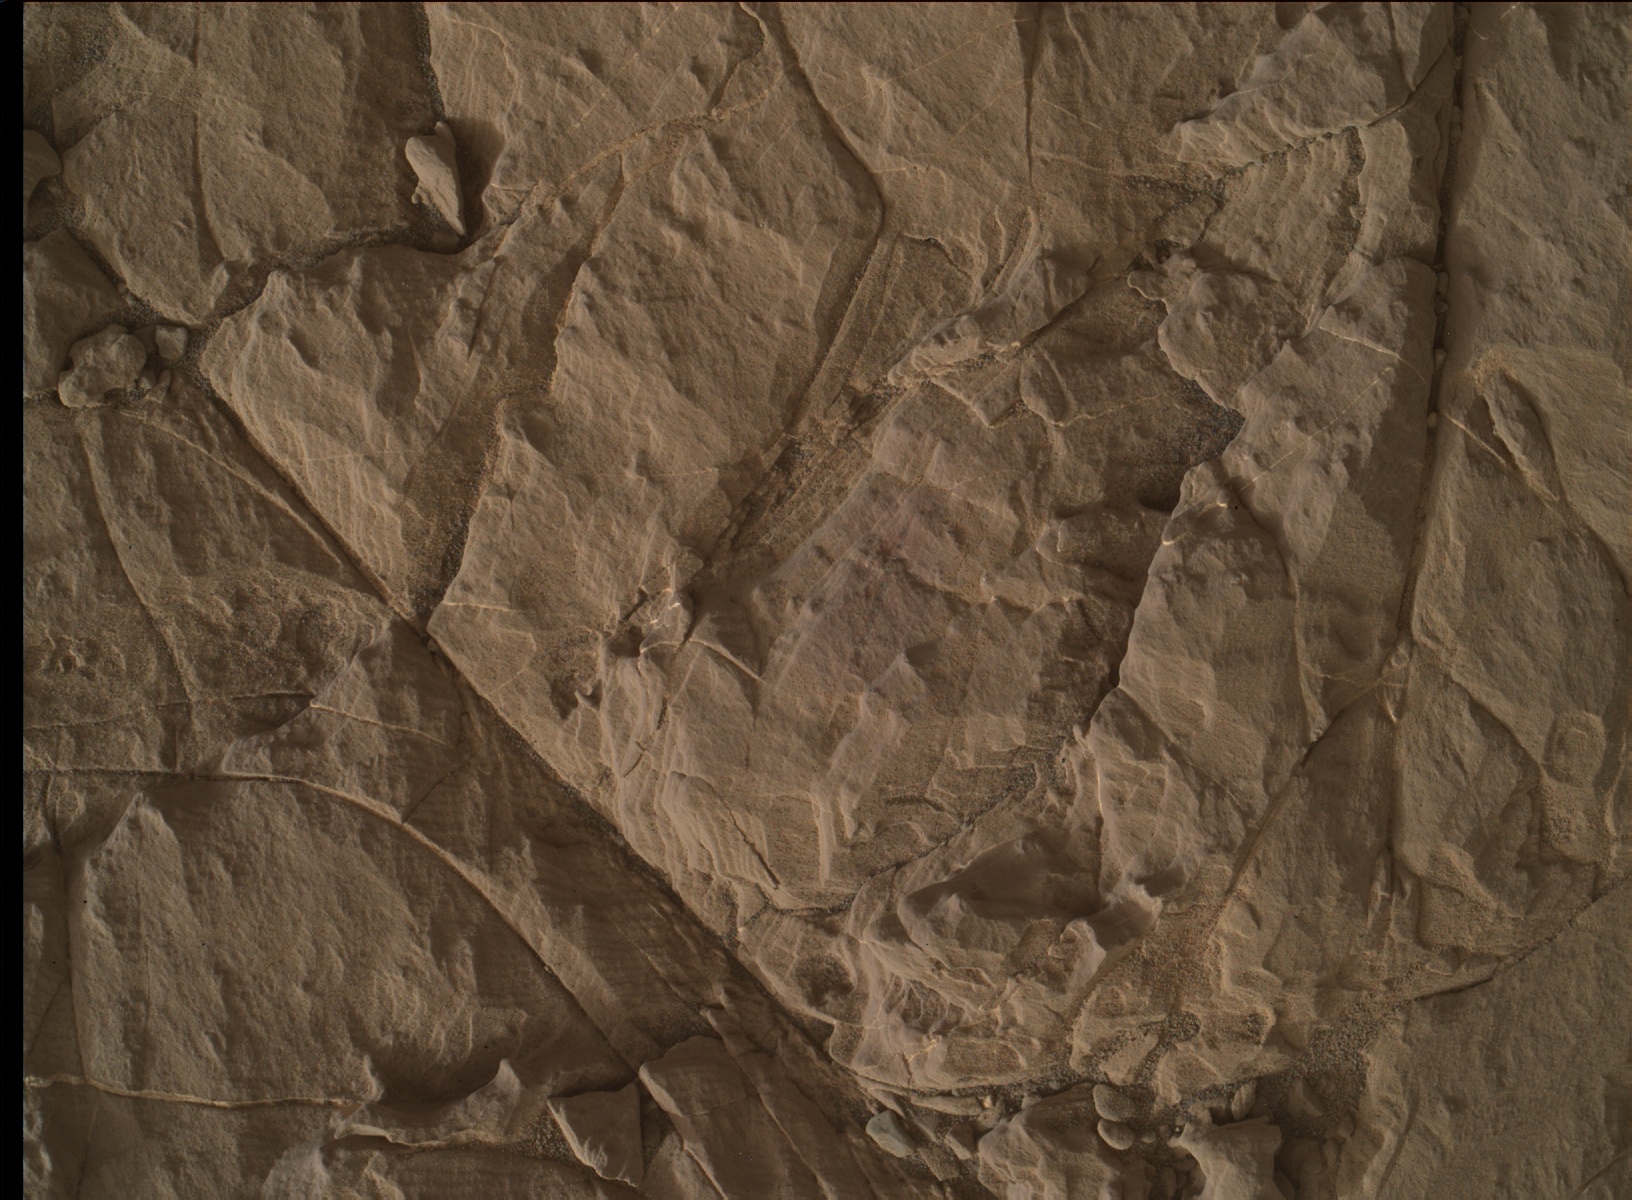 Nasa's Mars rover Curiosity acquired this image using its Mars Hand Lens Imager (MAHLI) on Sol 1852